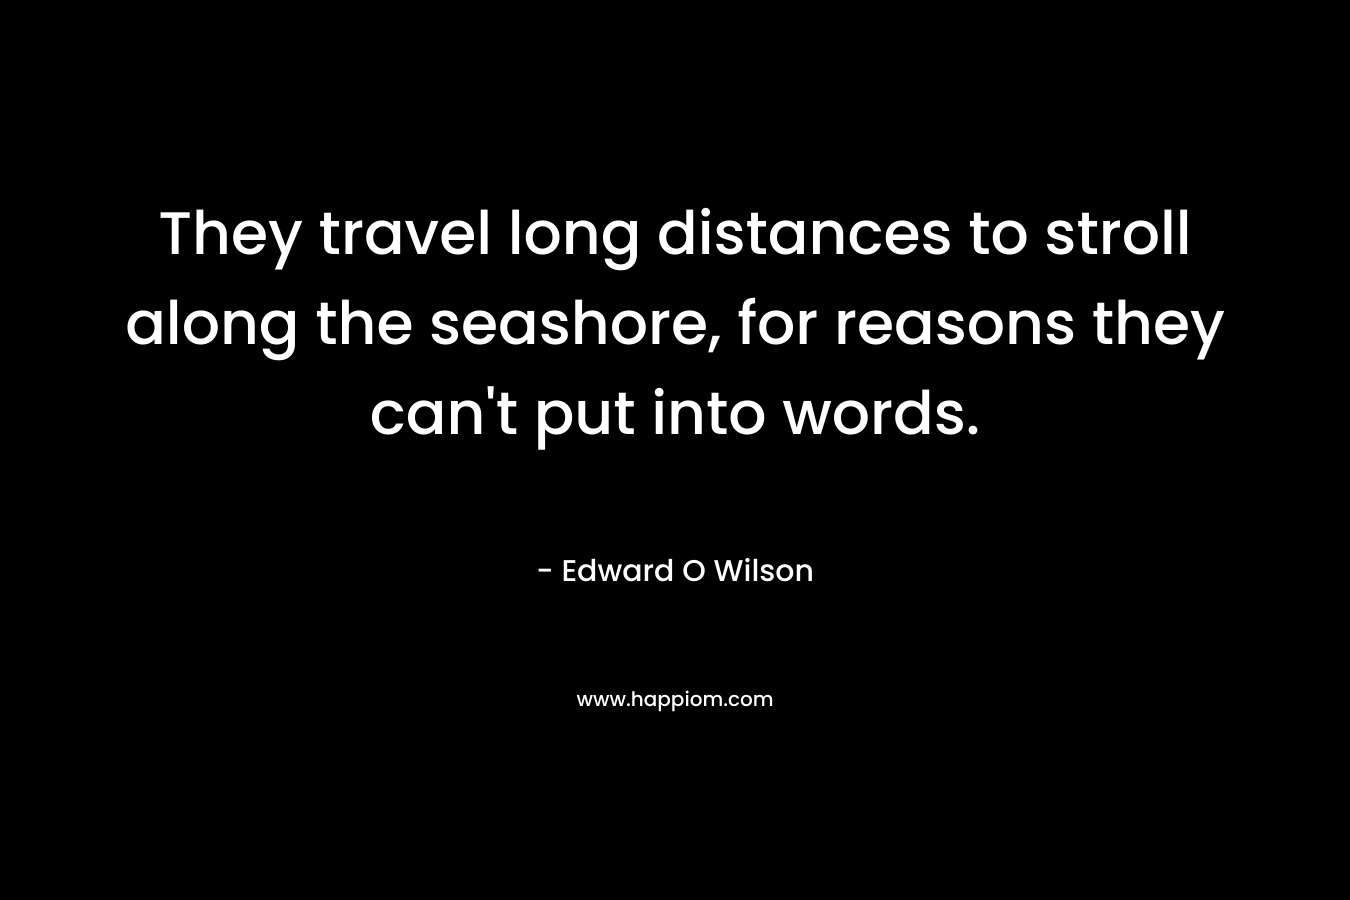 They travel long distances to stroll along the seashore, for reasons they can’t put into words. – Edward O Wilson